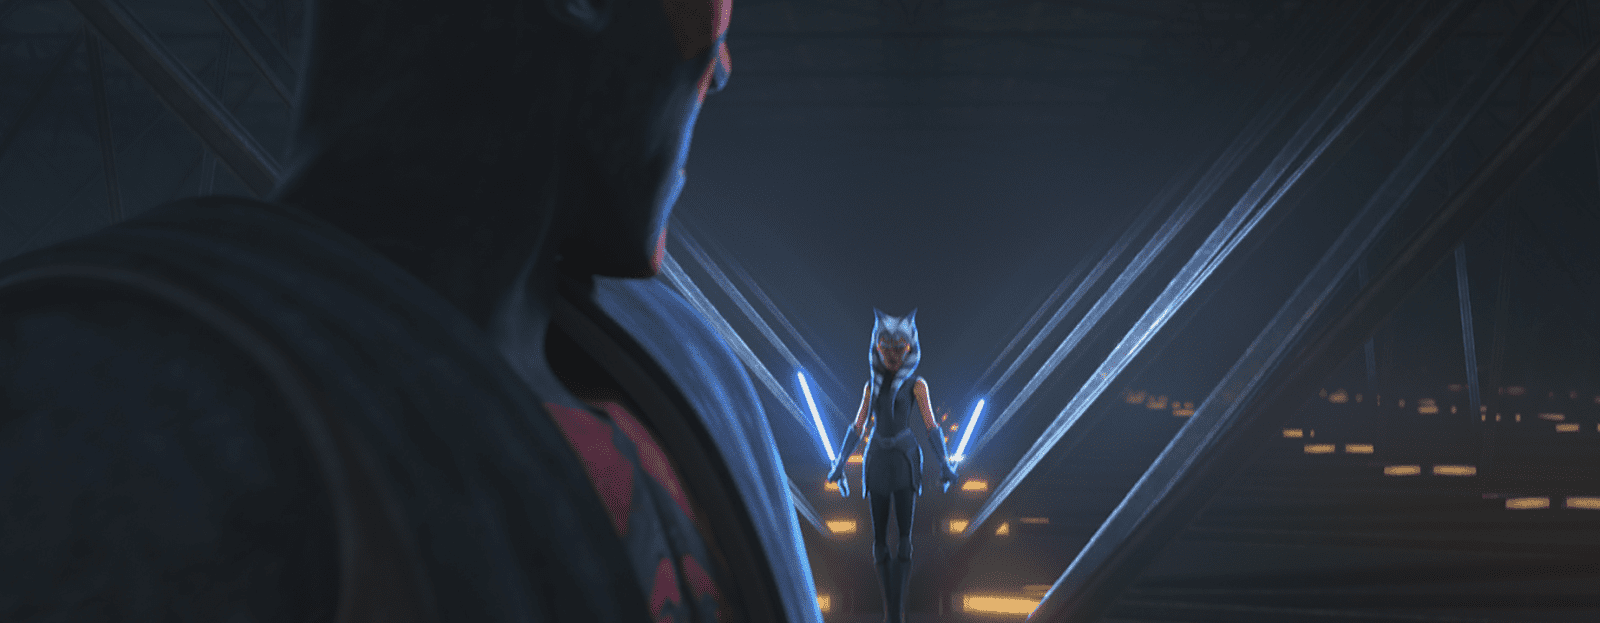 Ahsoka Tano prepares for battle while looking defiantly at her opponent.